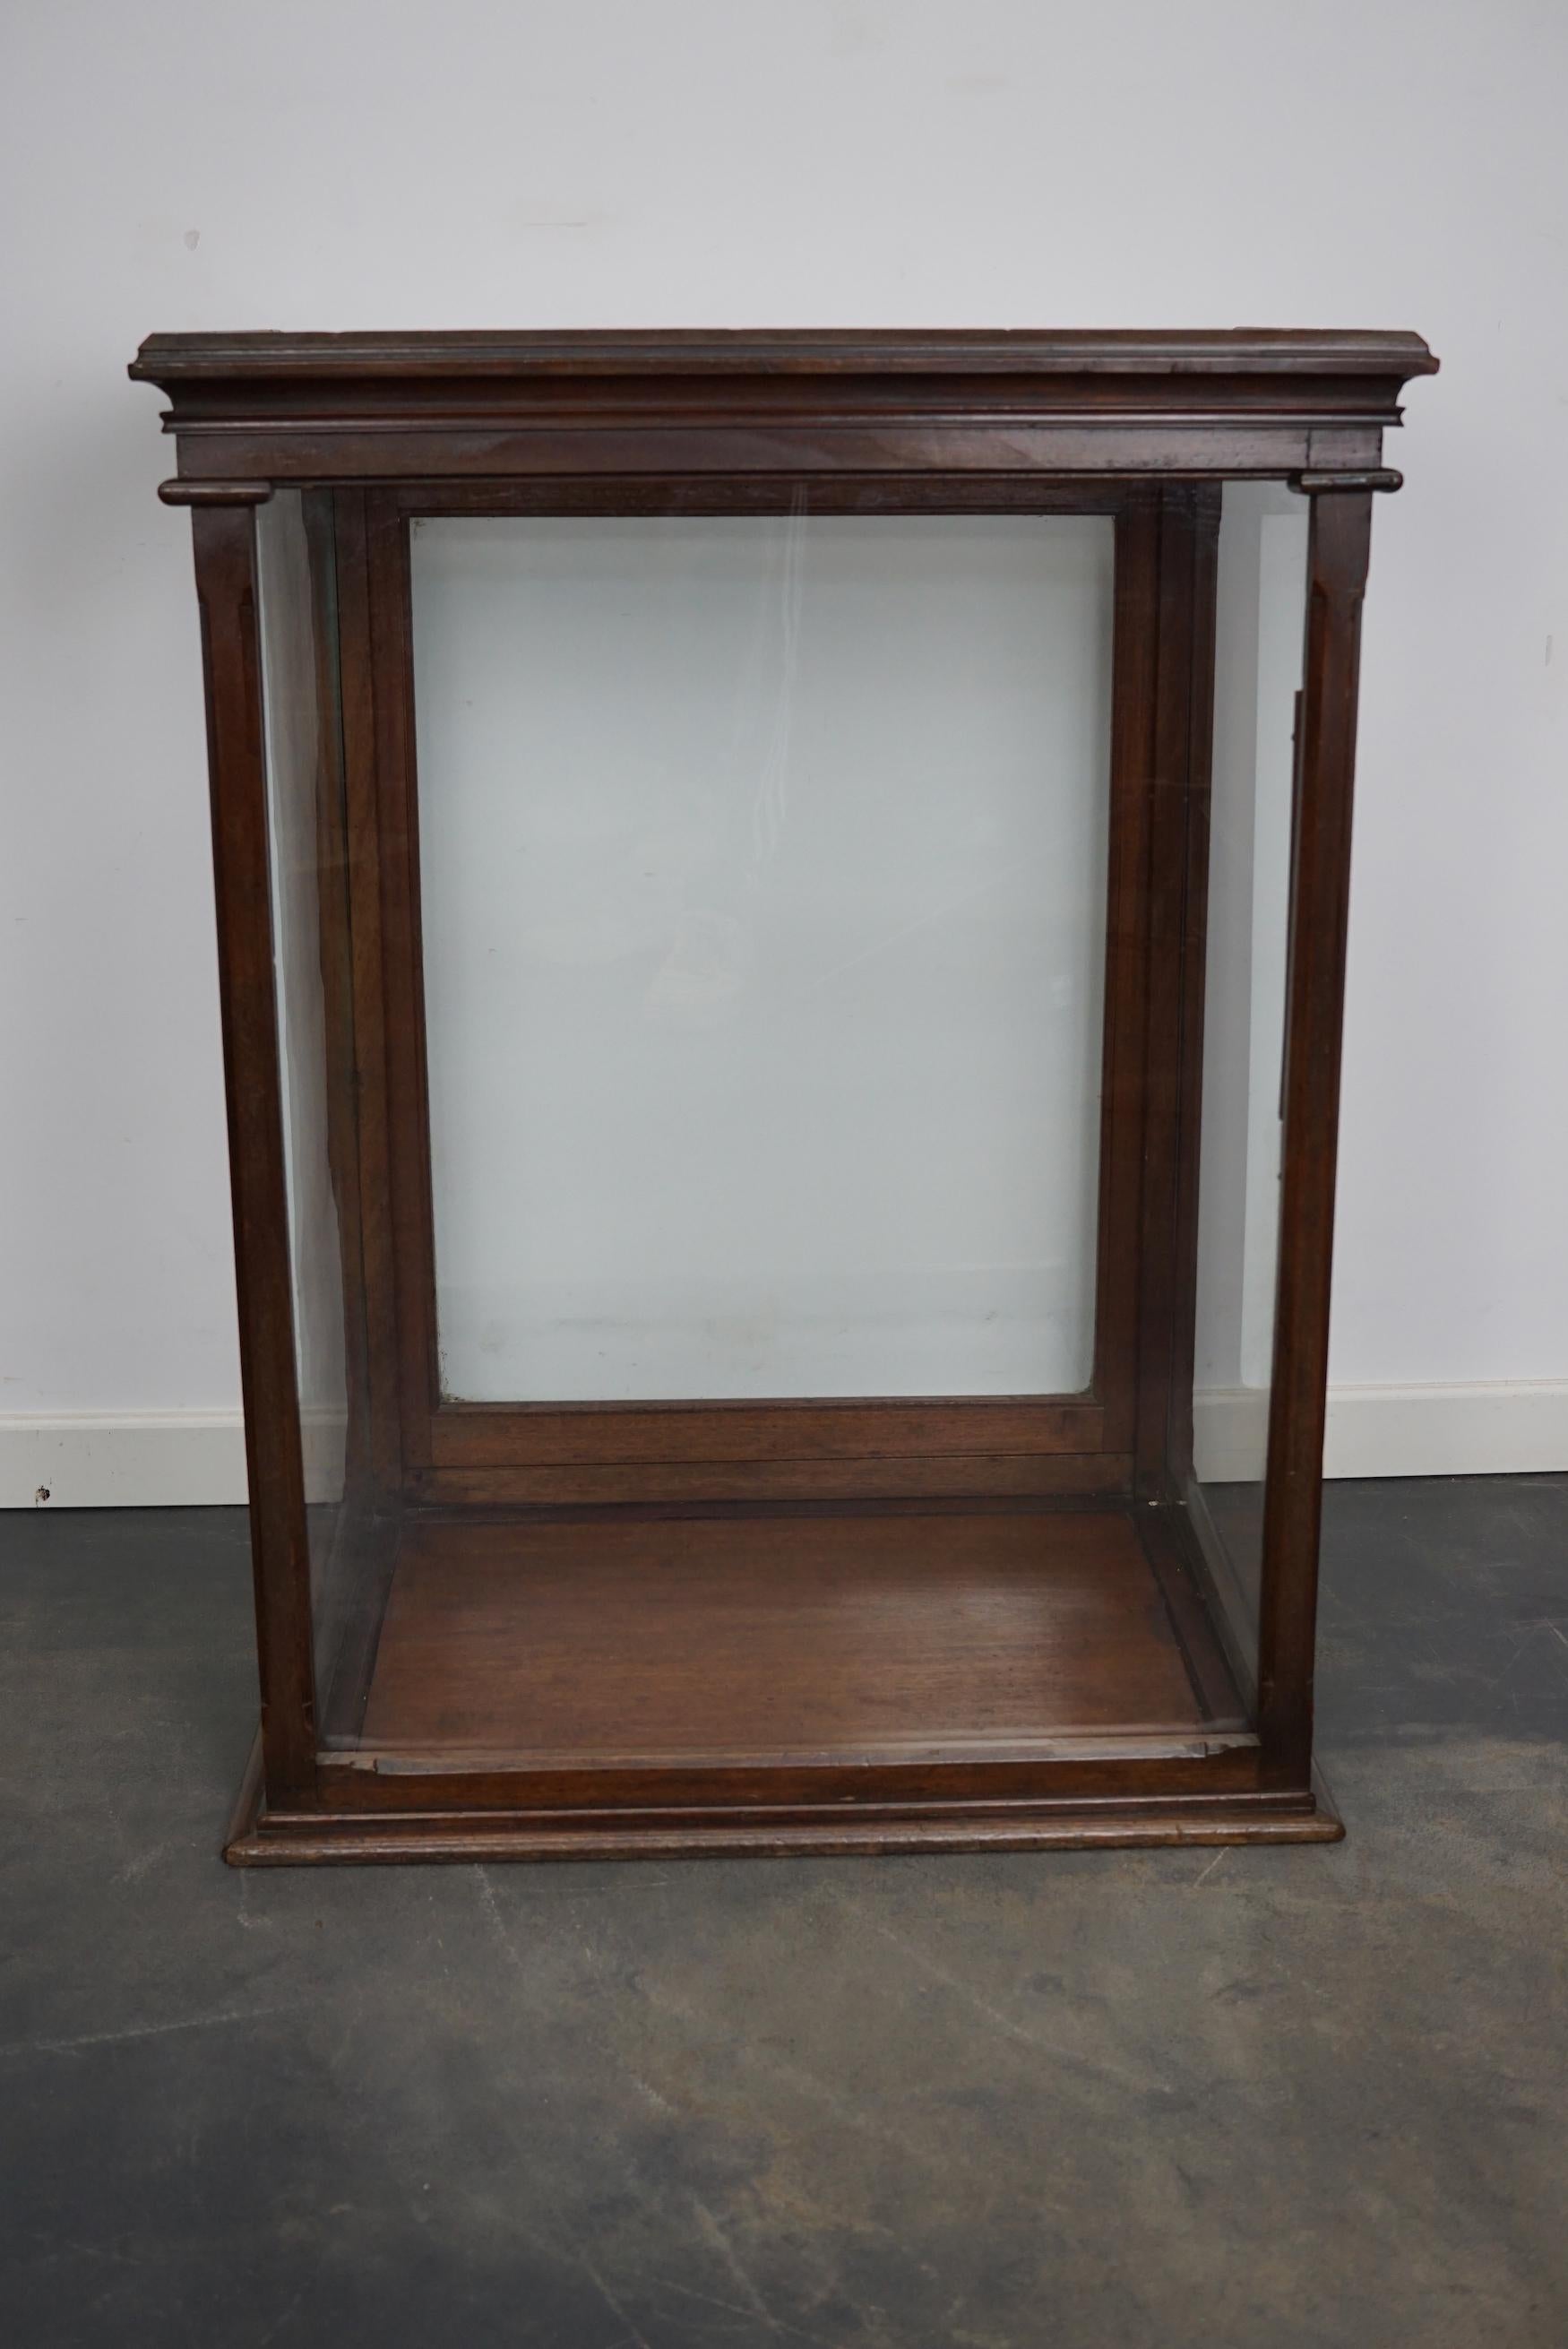 Late Victorian Victorian Mahogany Museum / Shop Display Cabinet or Vitrine, Late 19th Century For Sale